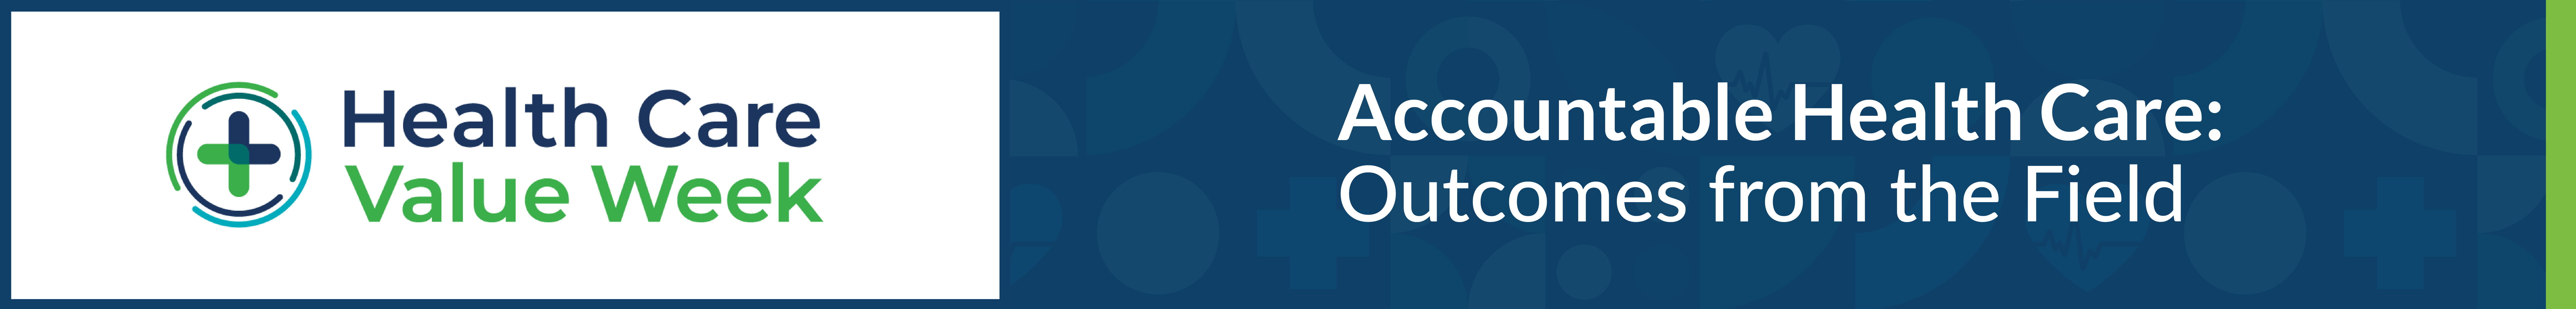 Accountable Health Care: Outcomes from the Field